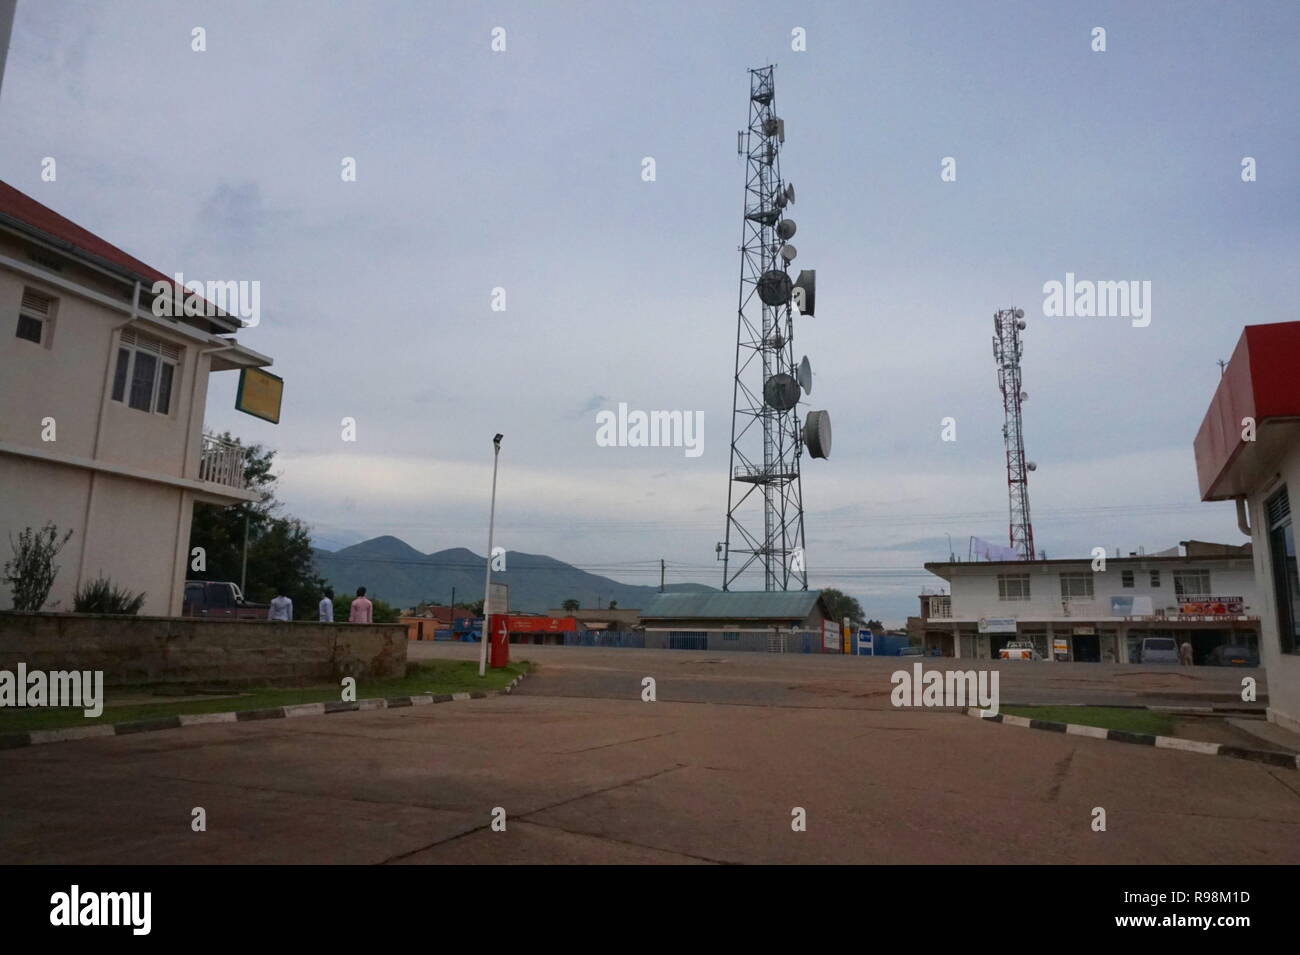 A telecoms aerial in a rural town in Uganda Stock Photo